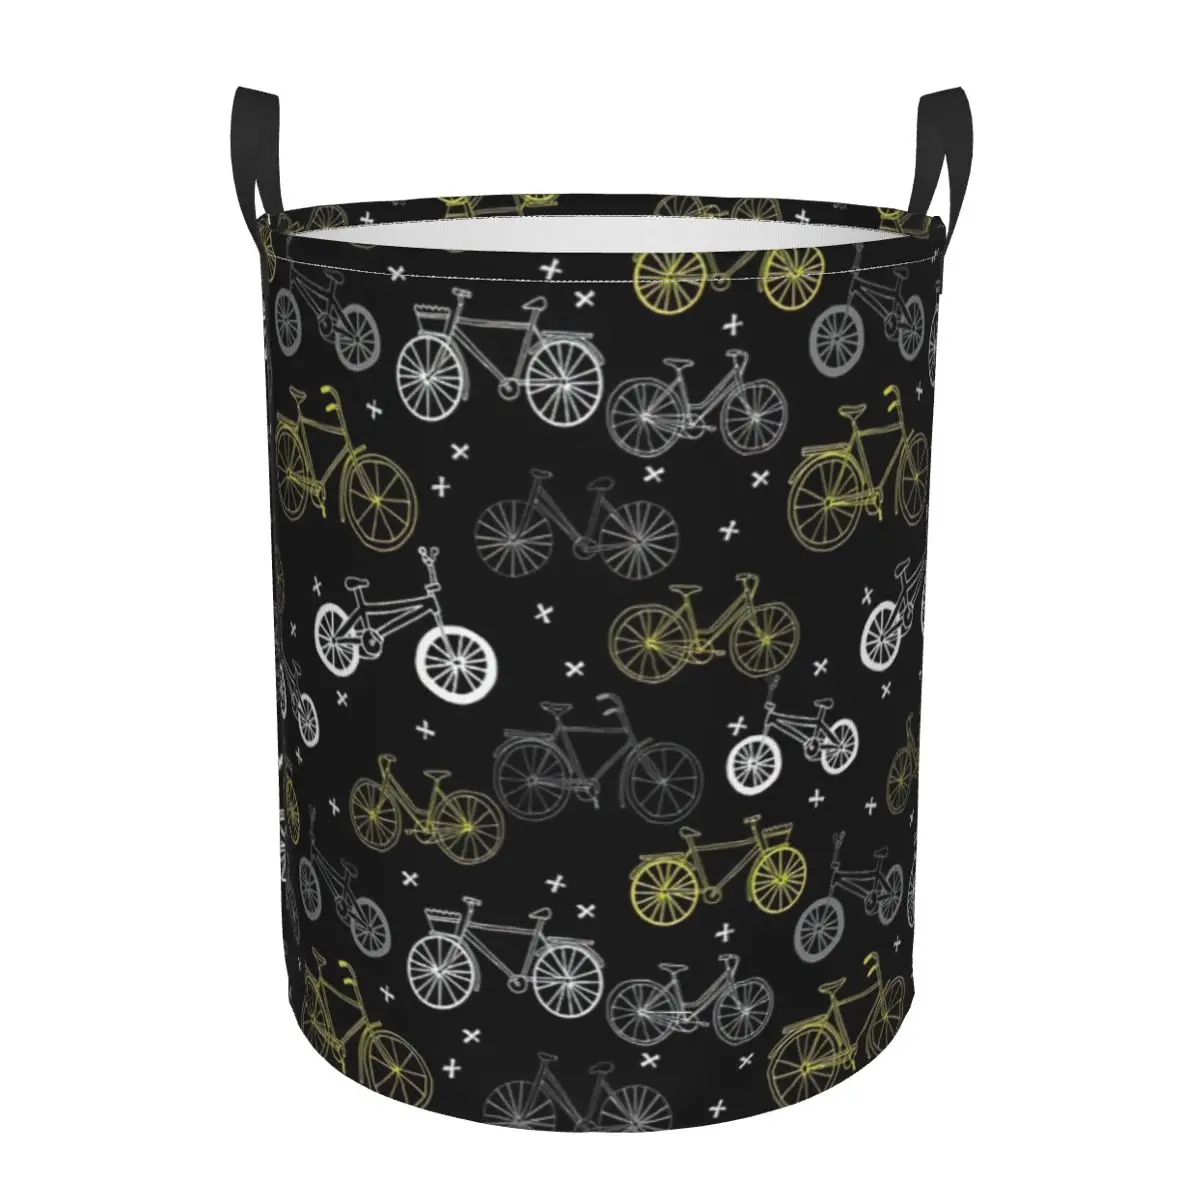 

Bicycles Black And Grey By Andrea Lauren Dirty Laundry Basket Waterproof Home Organizer Basket Clothing Kids Toy Storage Basket